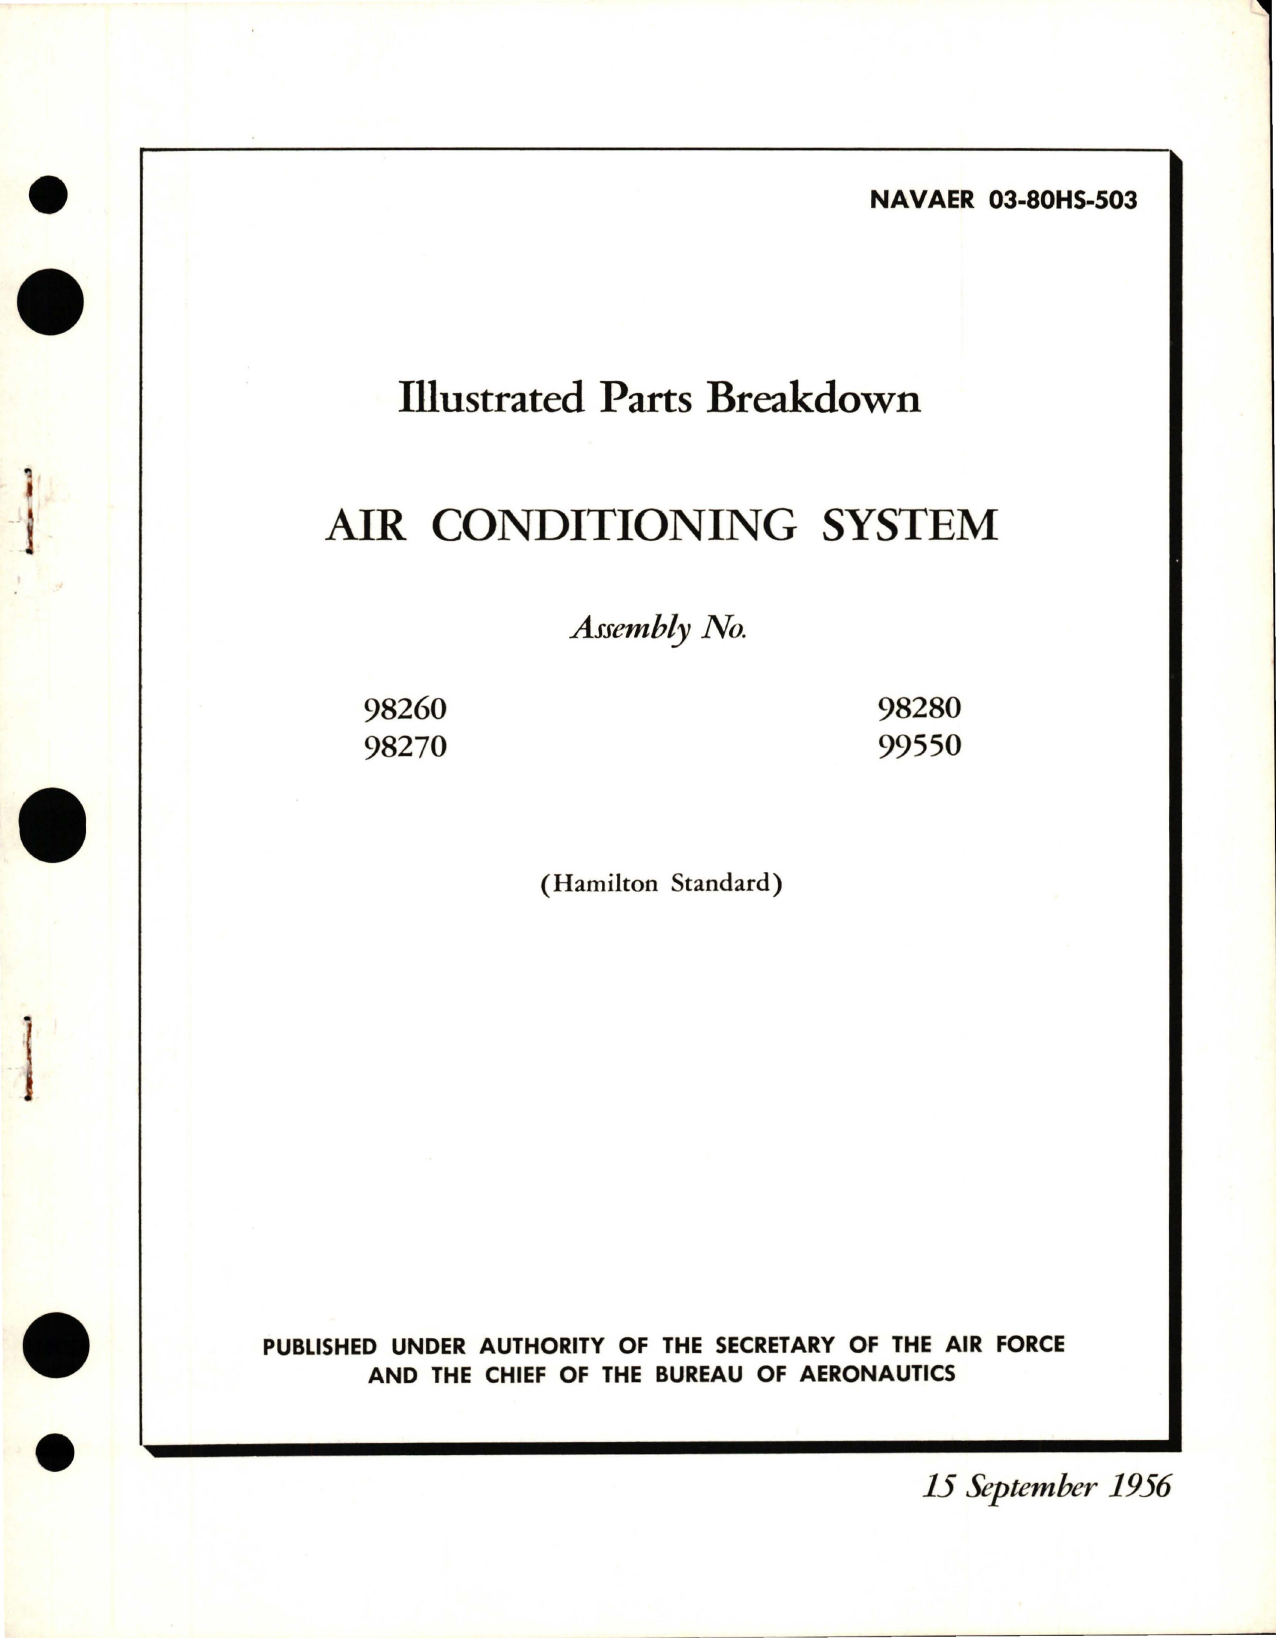 Sample page 1 from AirCorps Library document: Illustrated Parts Breakdown for Air Conditioning System - Assembly No 98260, 98270, 98280, and 99550 